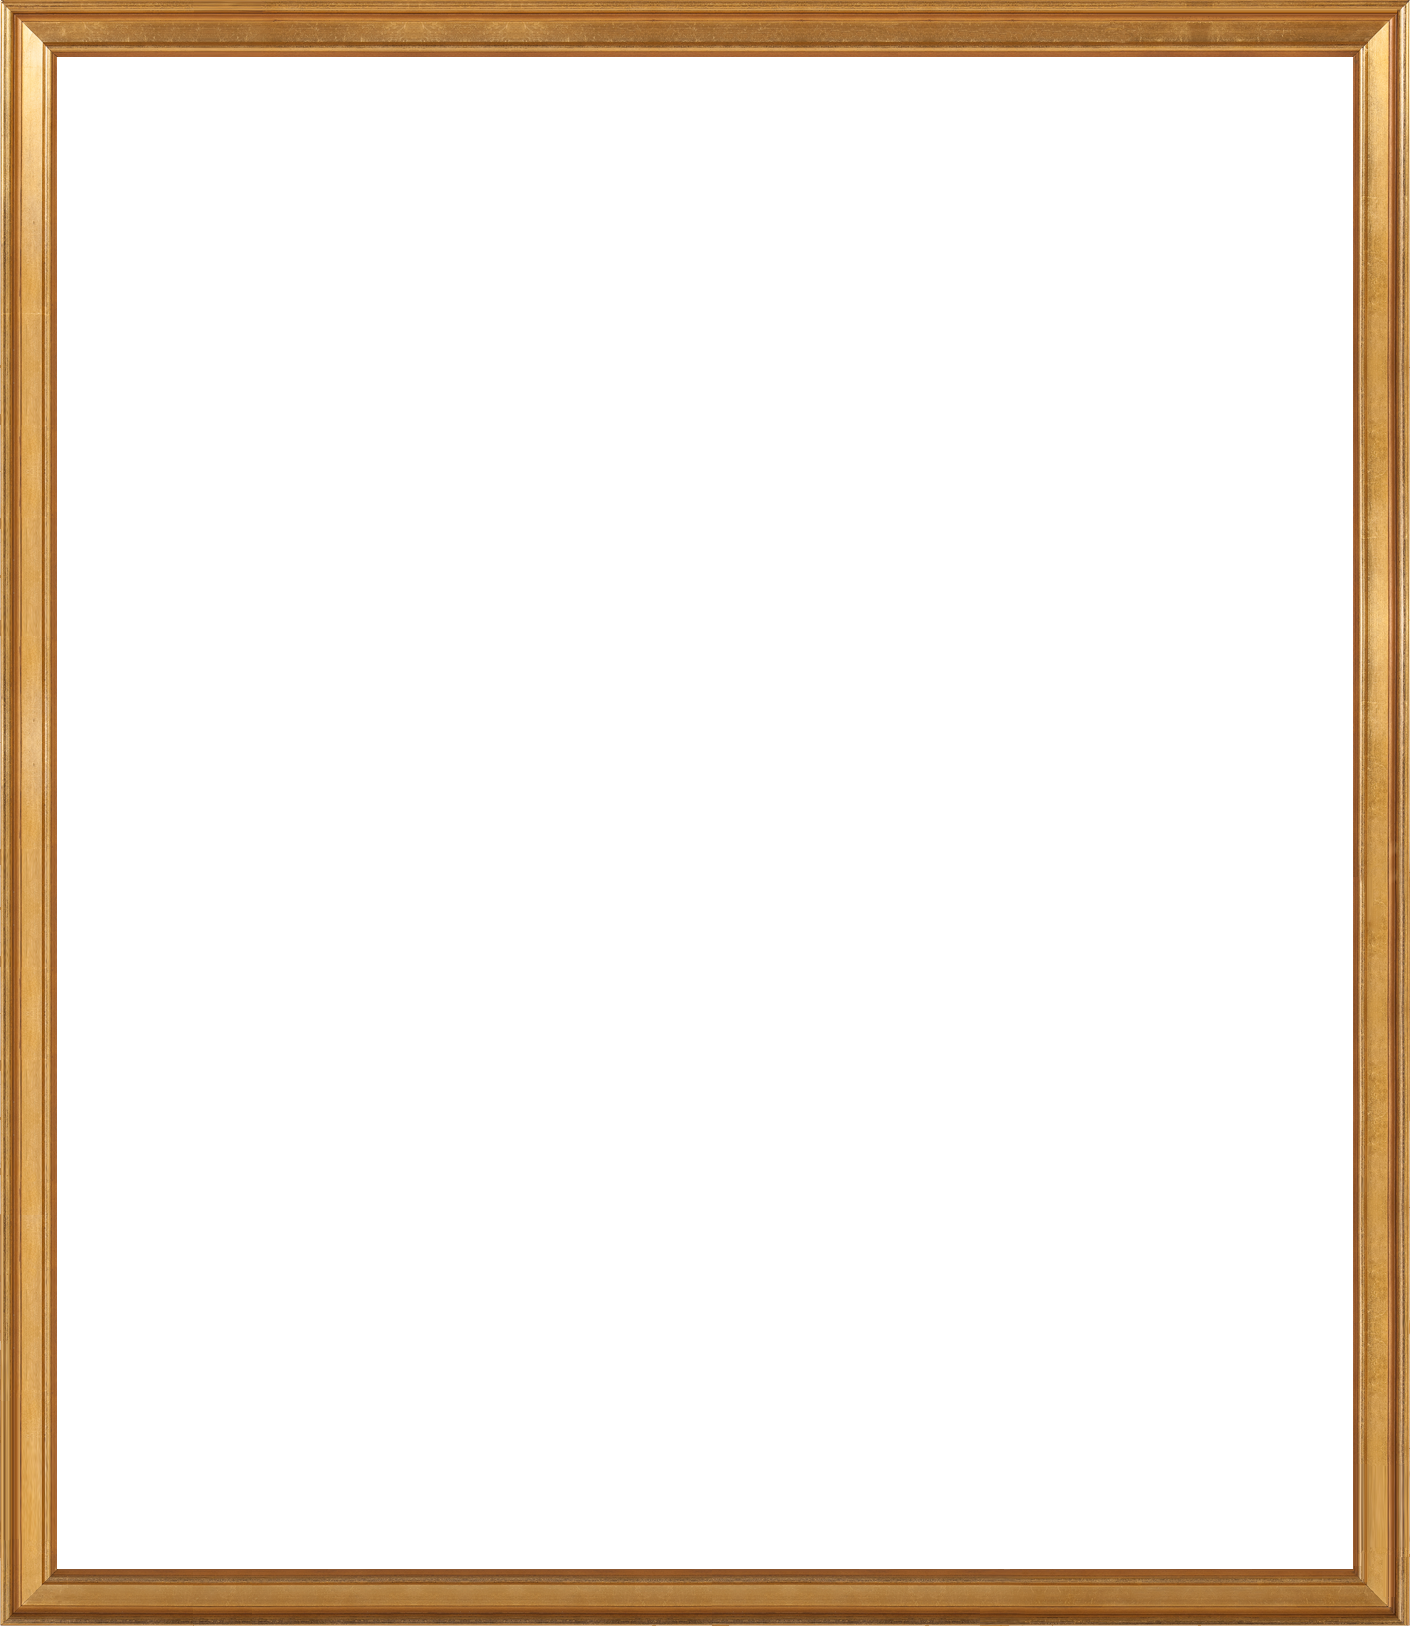 Heart Frames Gold Frame Png Silver Simple Fuzzy Border